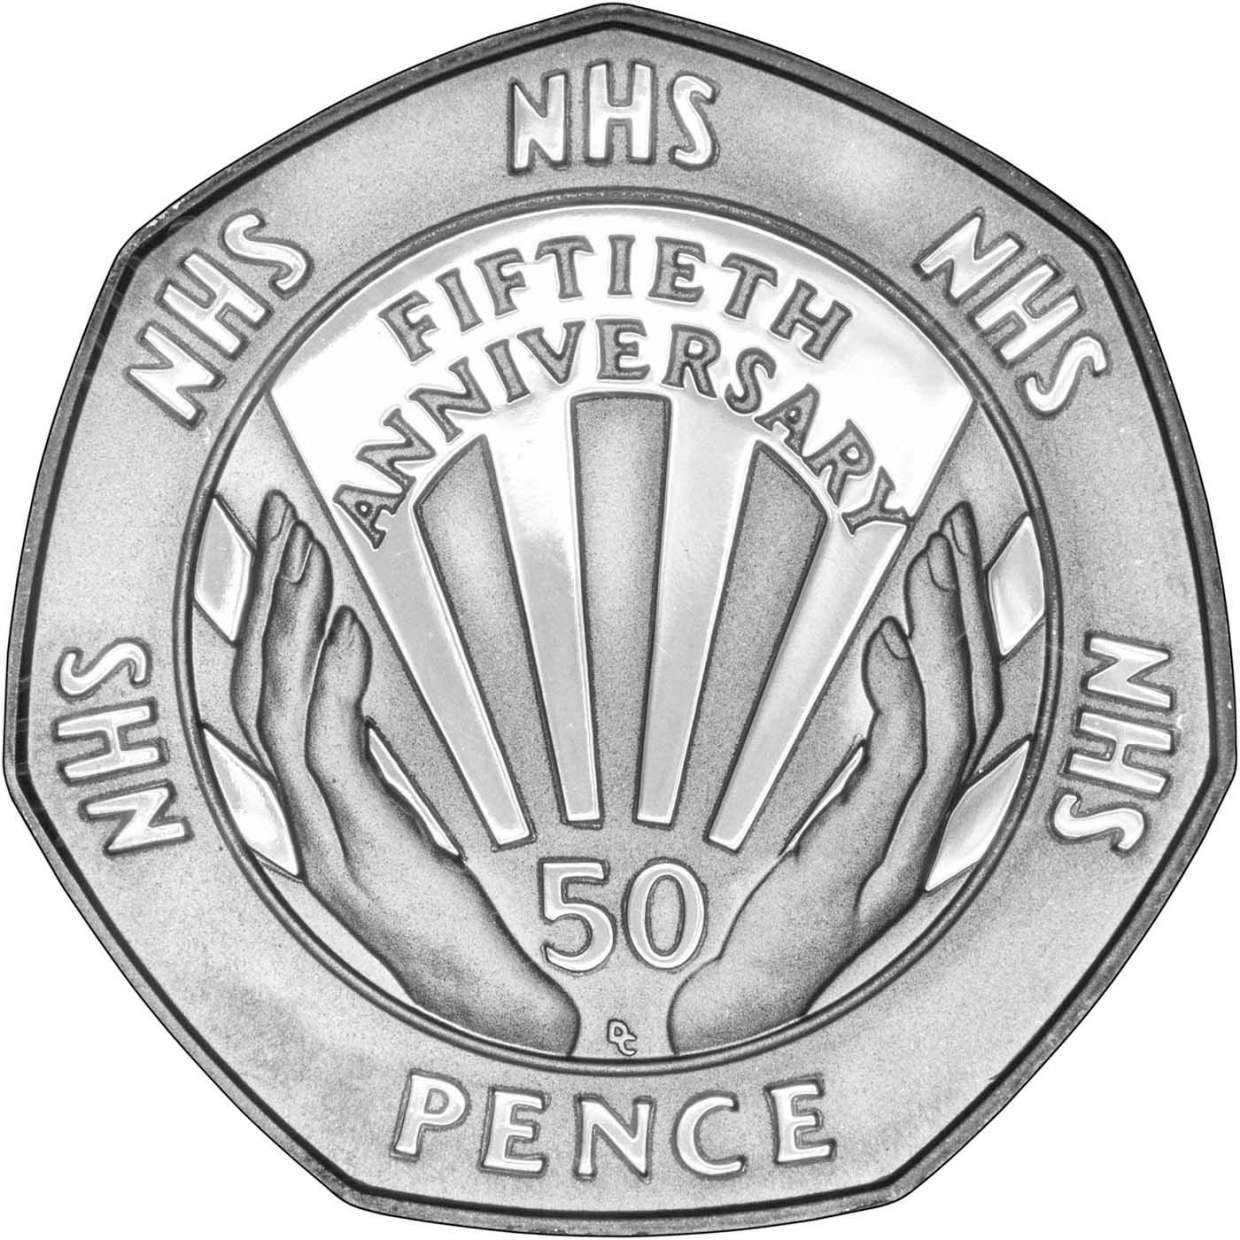 1998 UK Coin 50p Silver Proof NHS